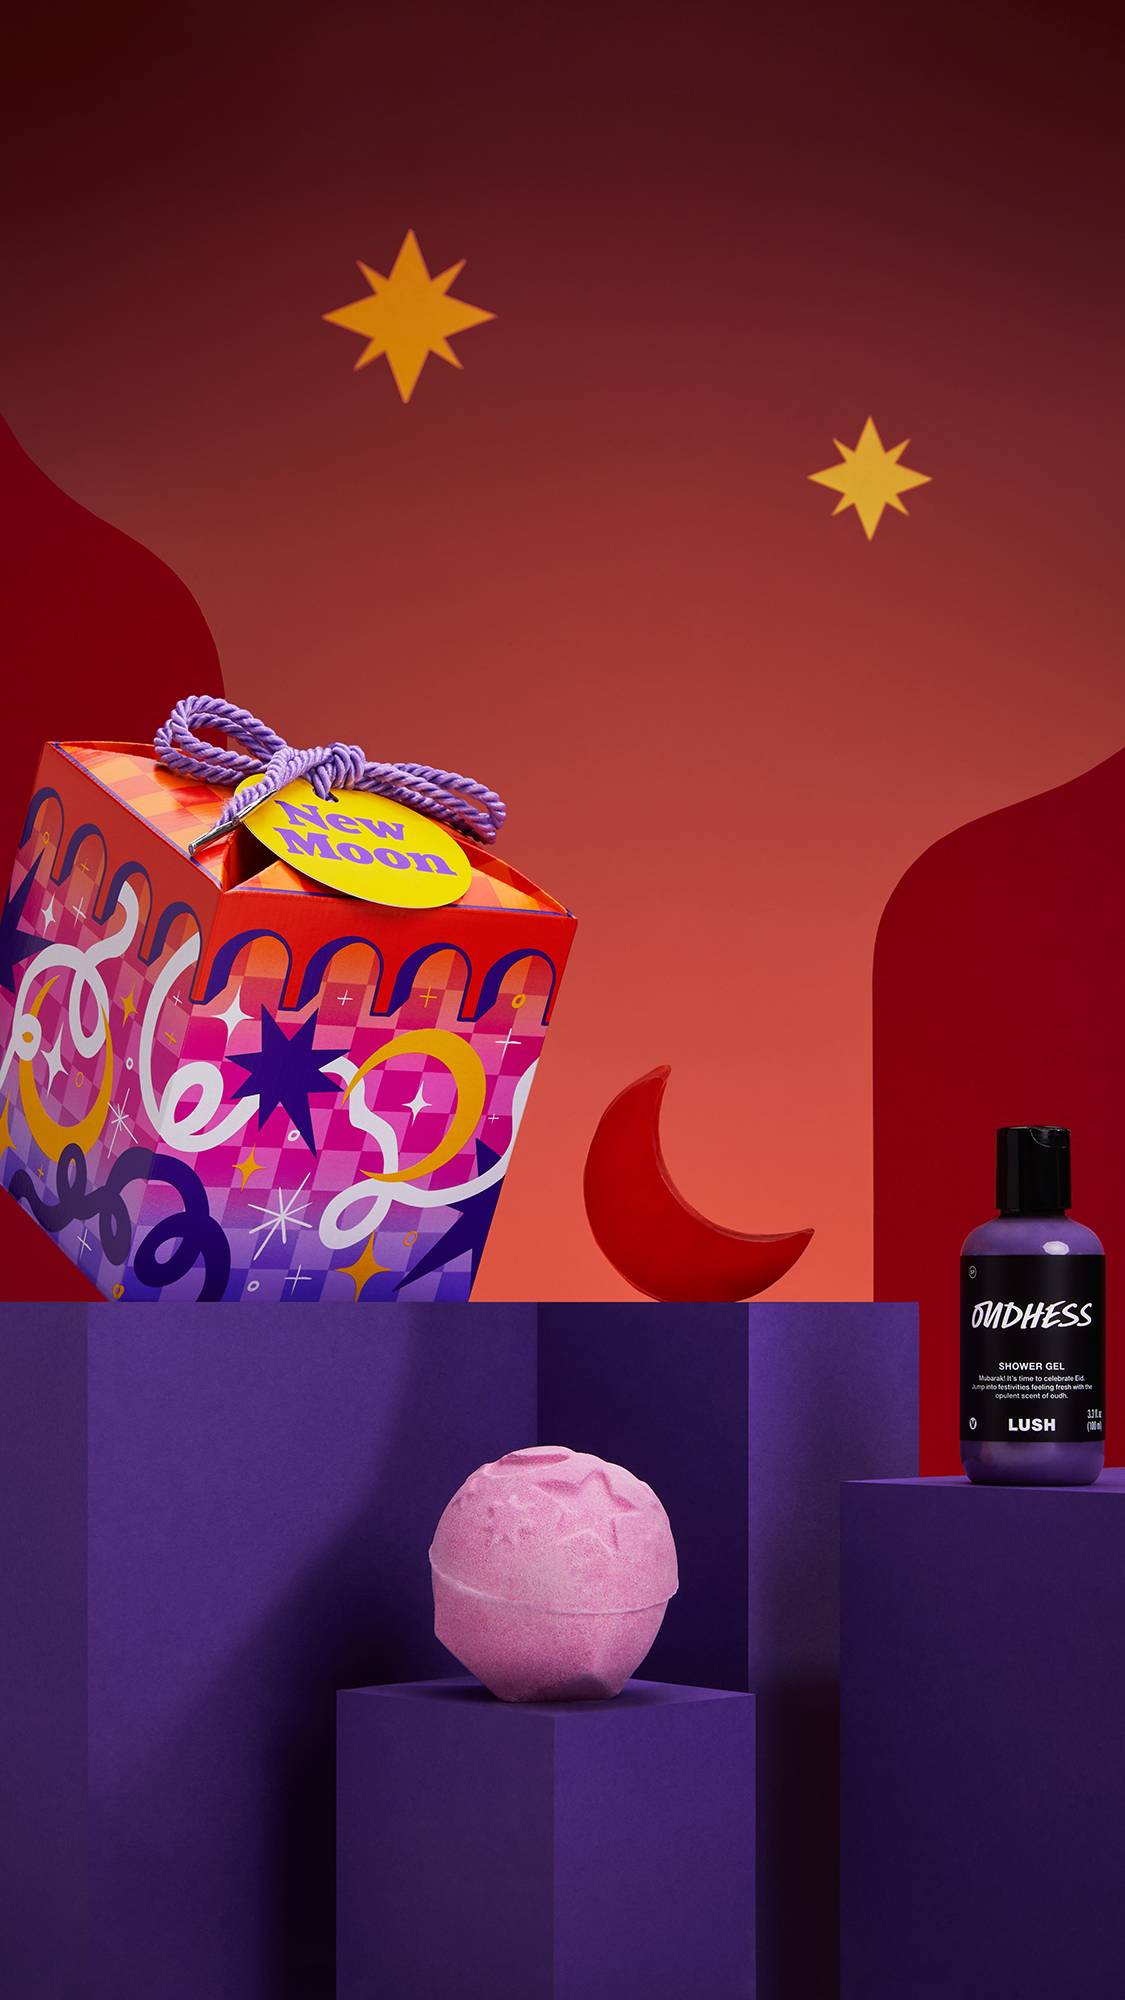 The image shows the New Moon gift box on a purple platform with three Eid-themed products on a red starry background.